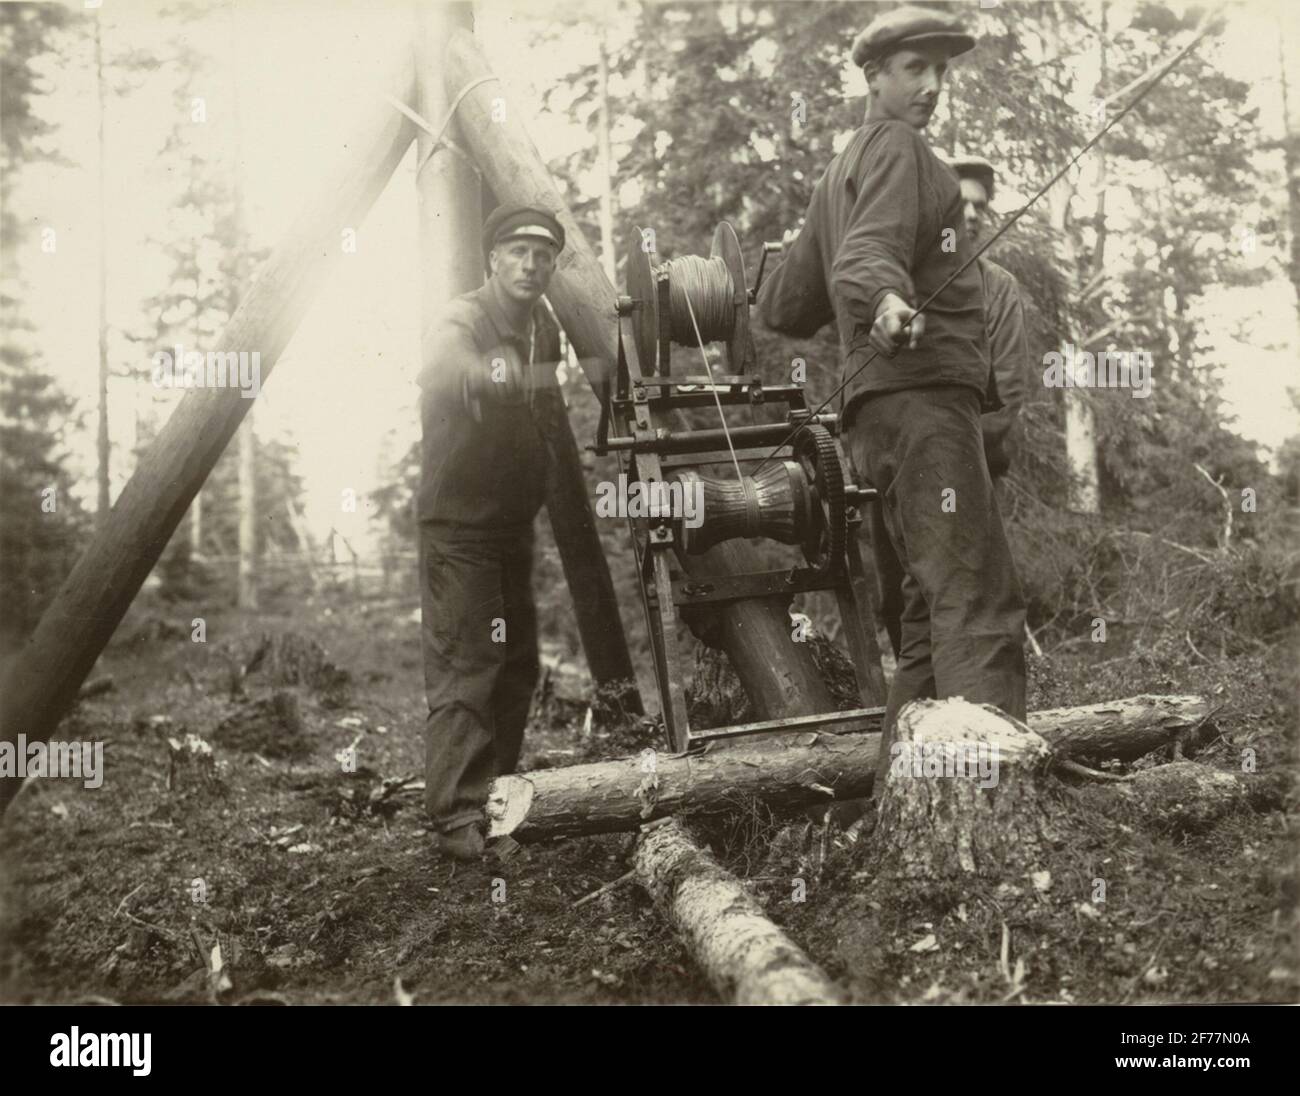 Three men in the work.Helm atrid cable. Winch for wiring. From the album cable work. Helmälra - Norrtälje - Finnviken performed during the summer of 1928. Stock Photo